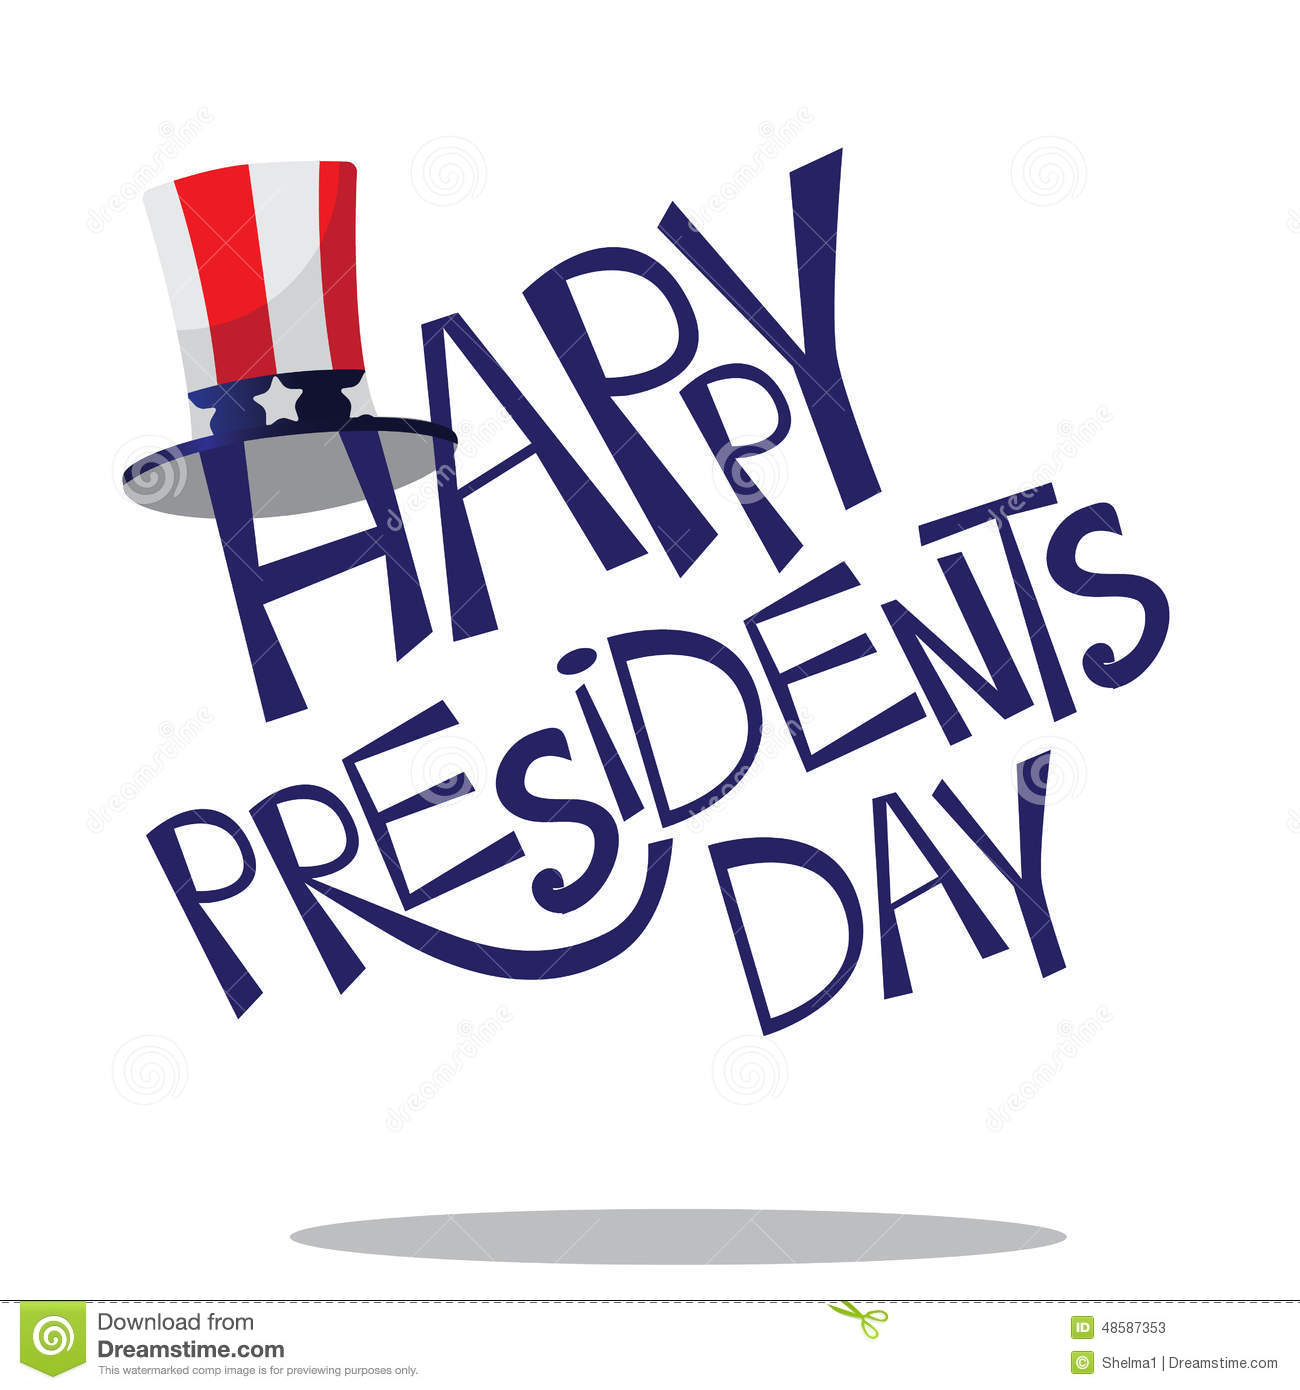 presidents-day-clipart-kid-5-cliparting